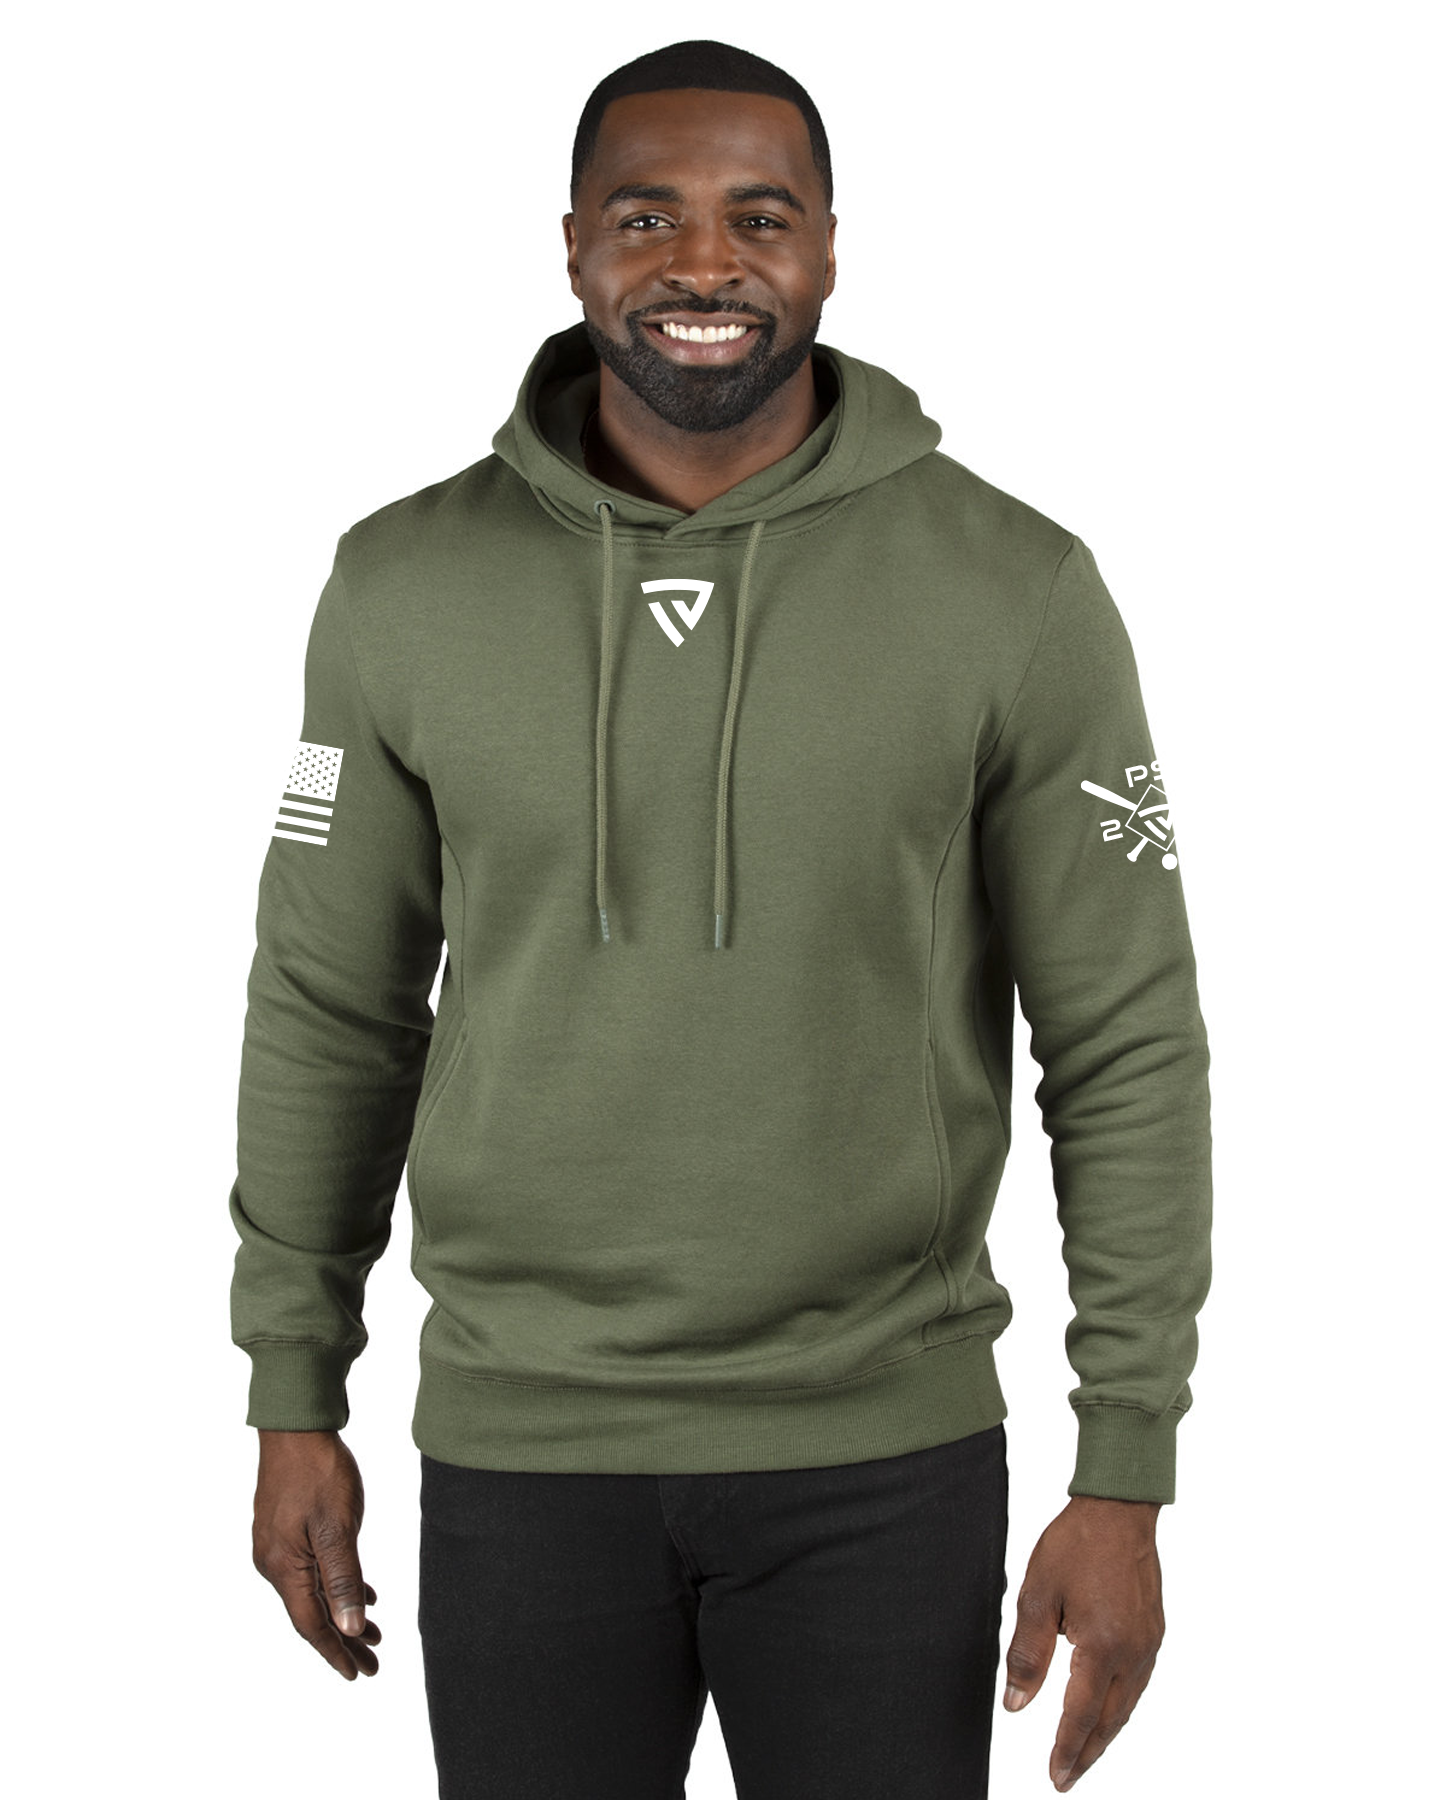 Men's Freedom Is Not Free X PS20 Military Green Hoodie